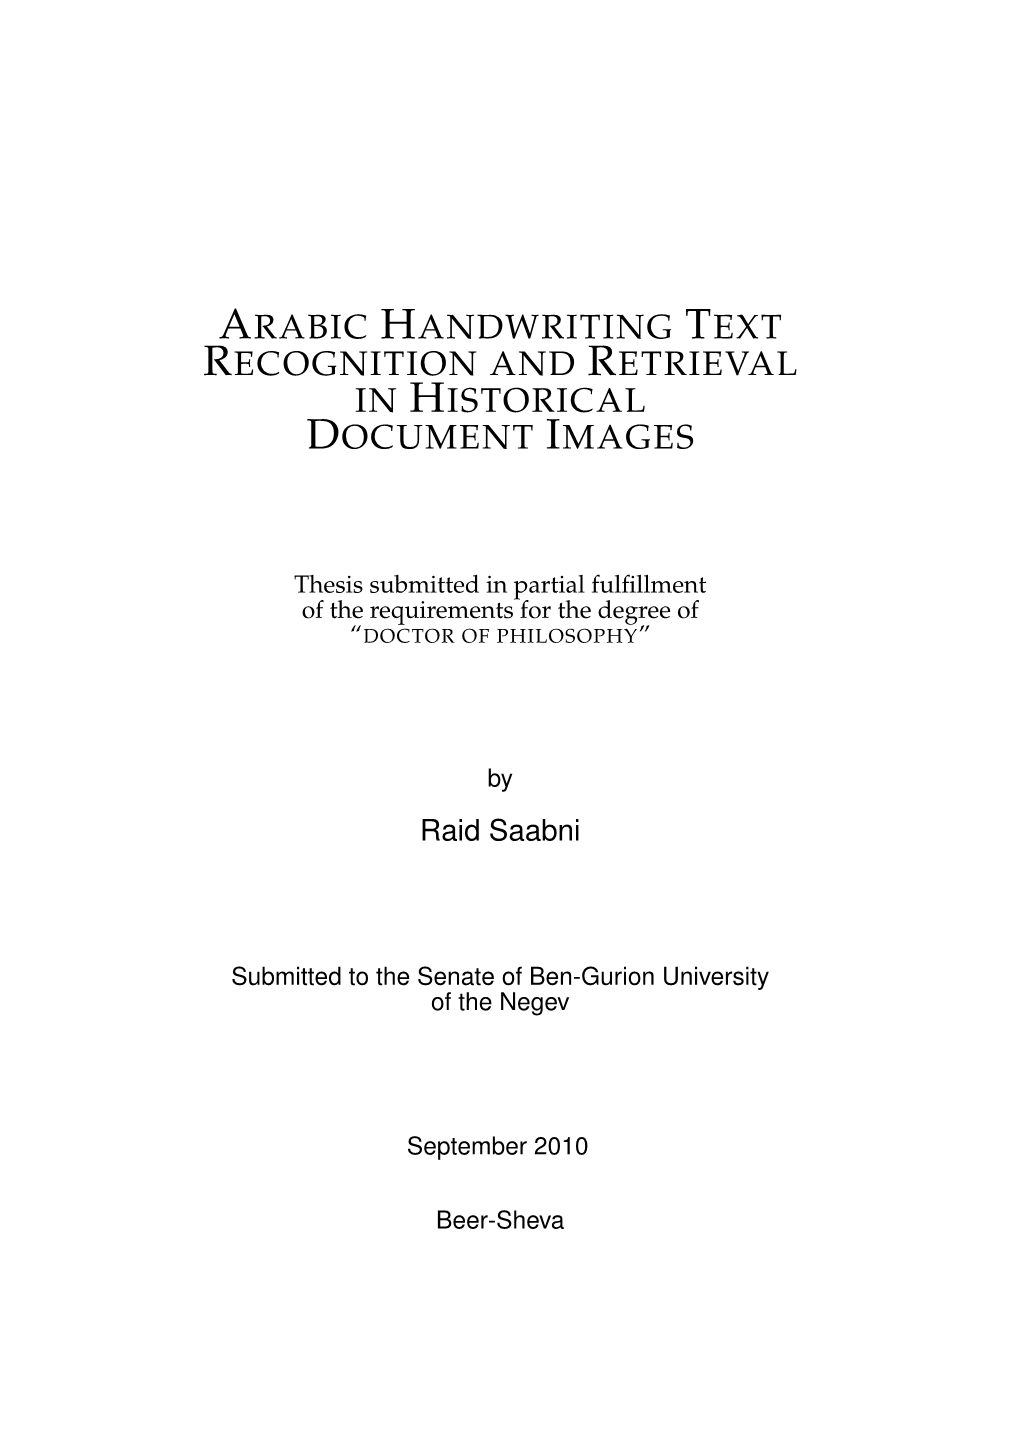 Arabic Handwriting Text Recognition and Retrieval